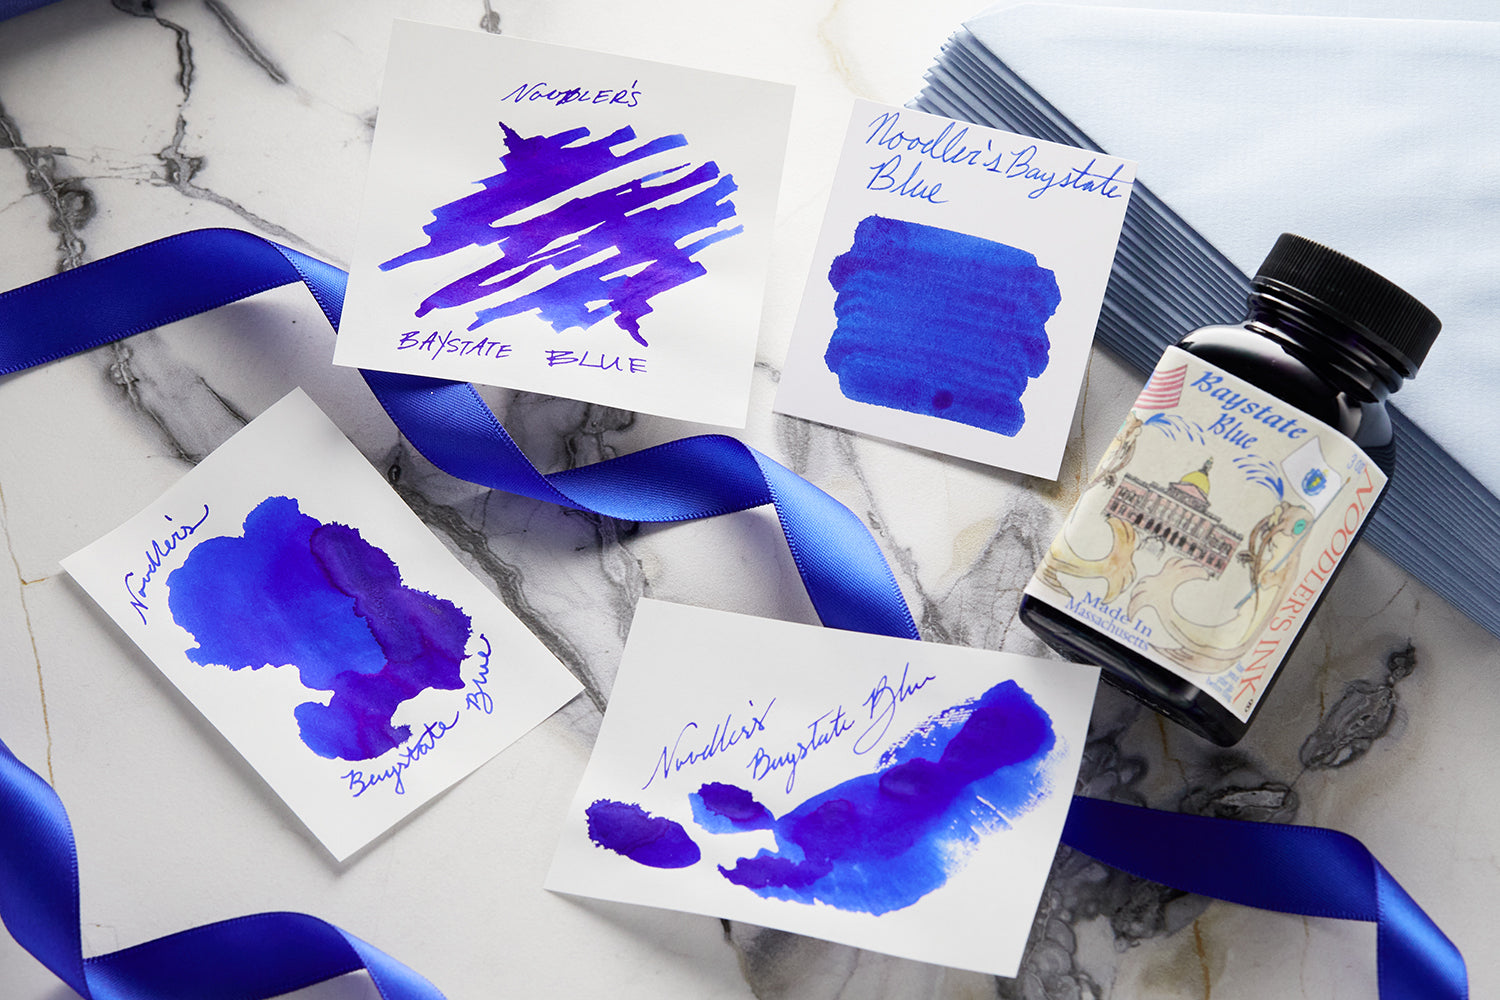 Noodler's Baystate Blue with examples